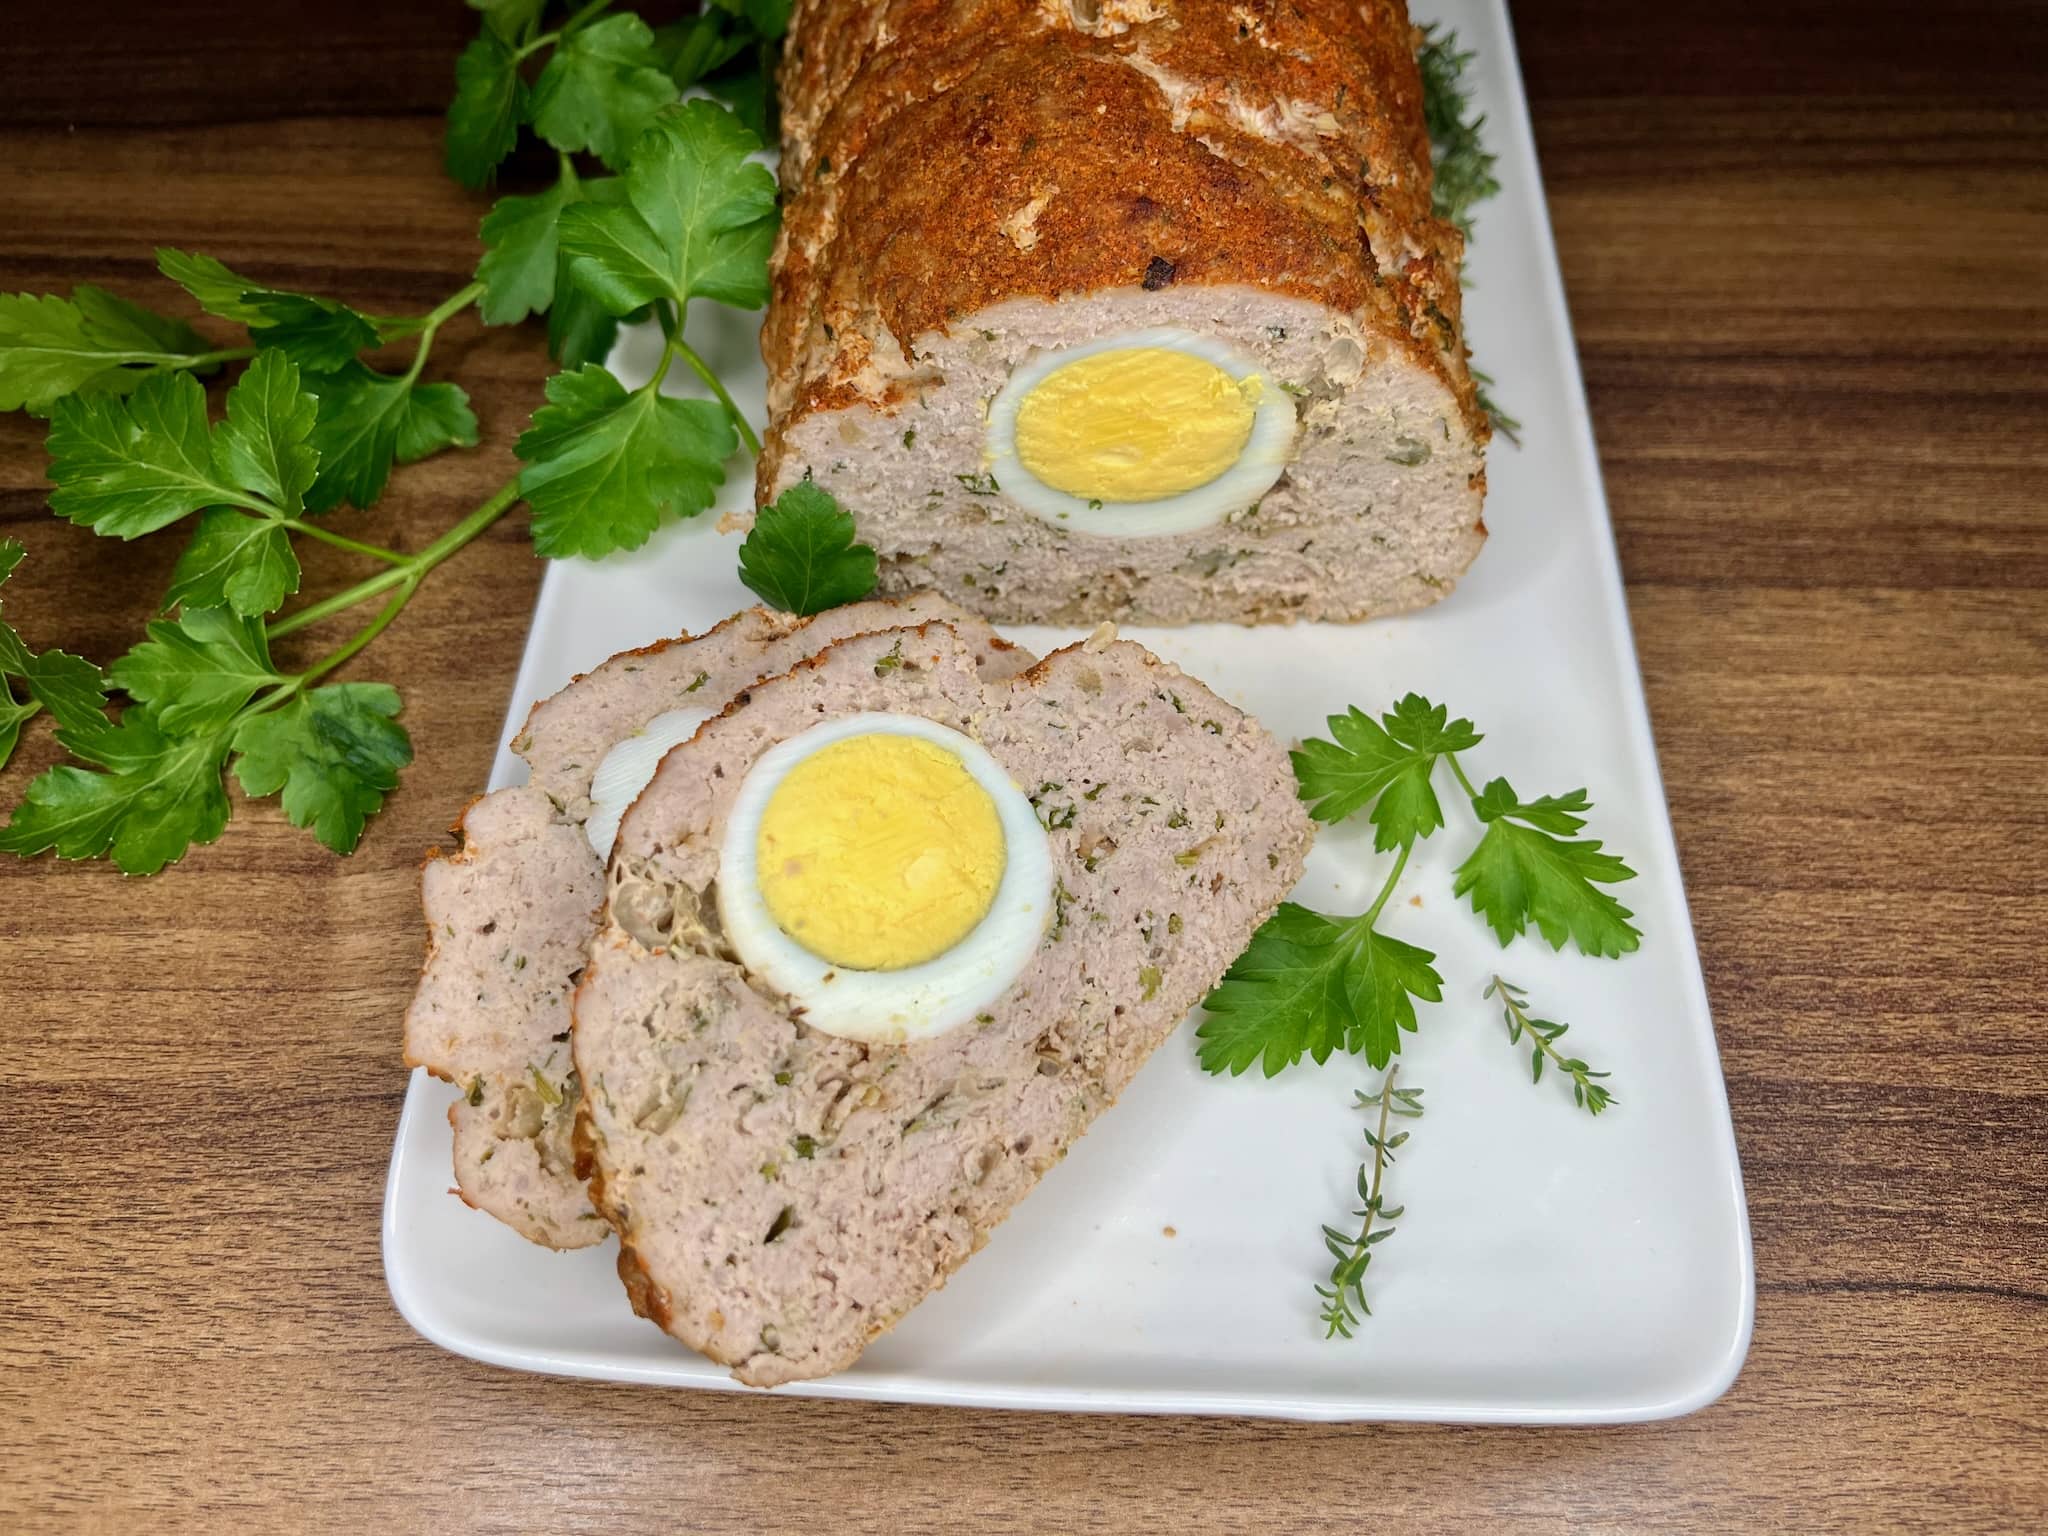 Meatloaf slices with nicely exposed egg inside